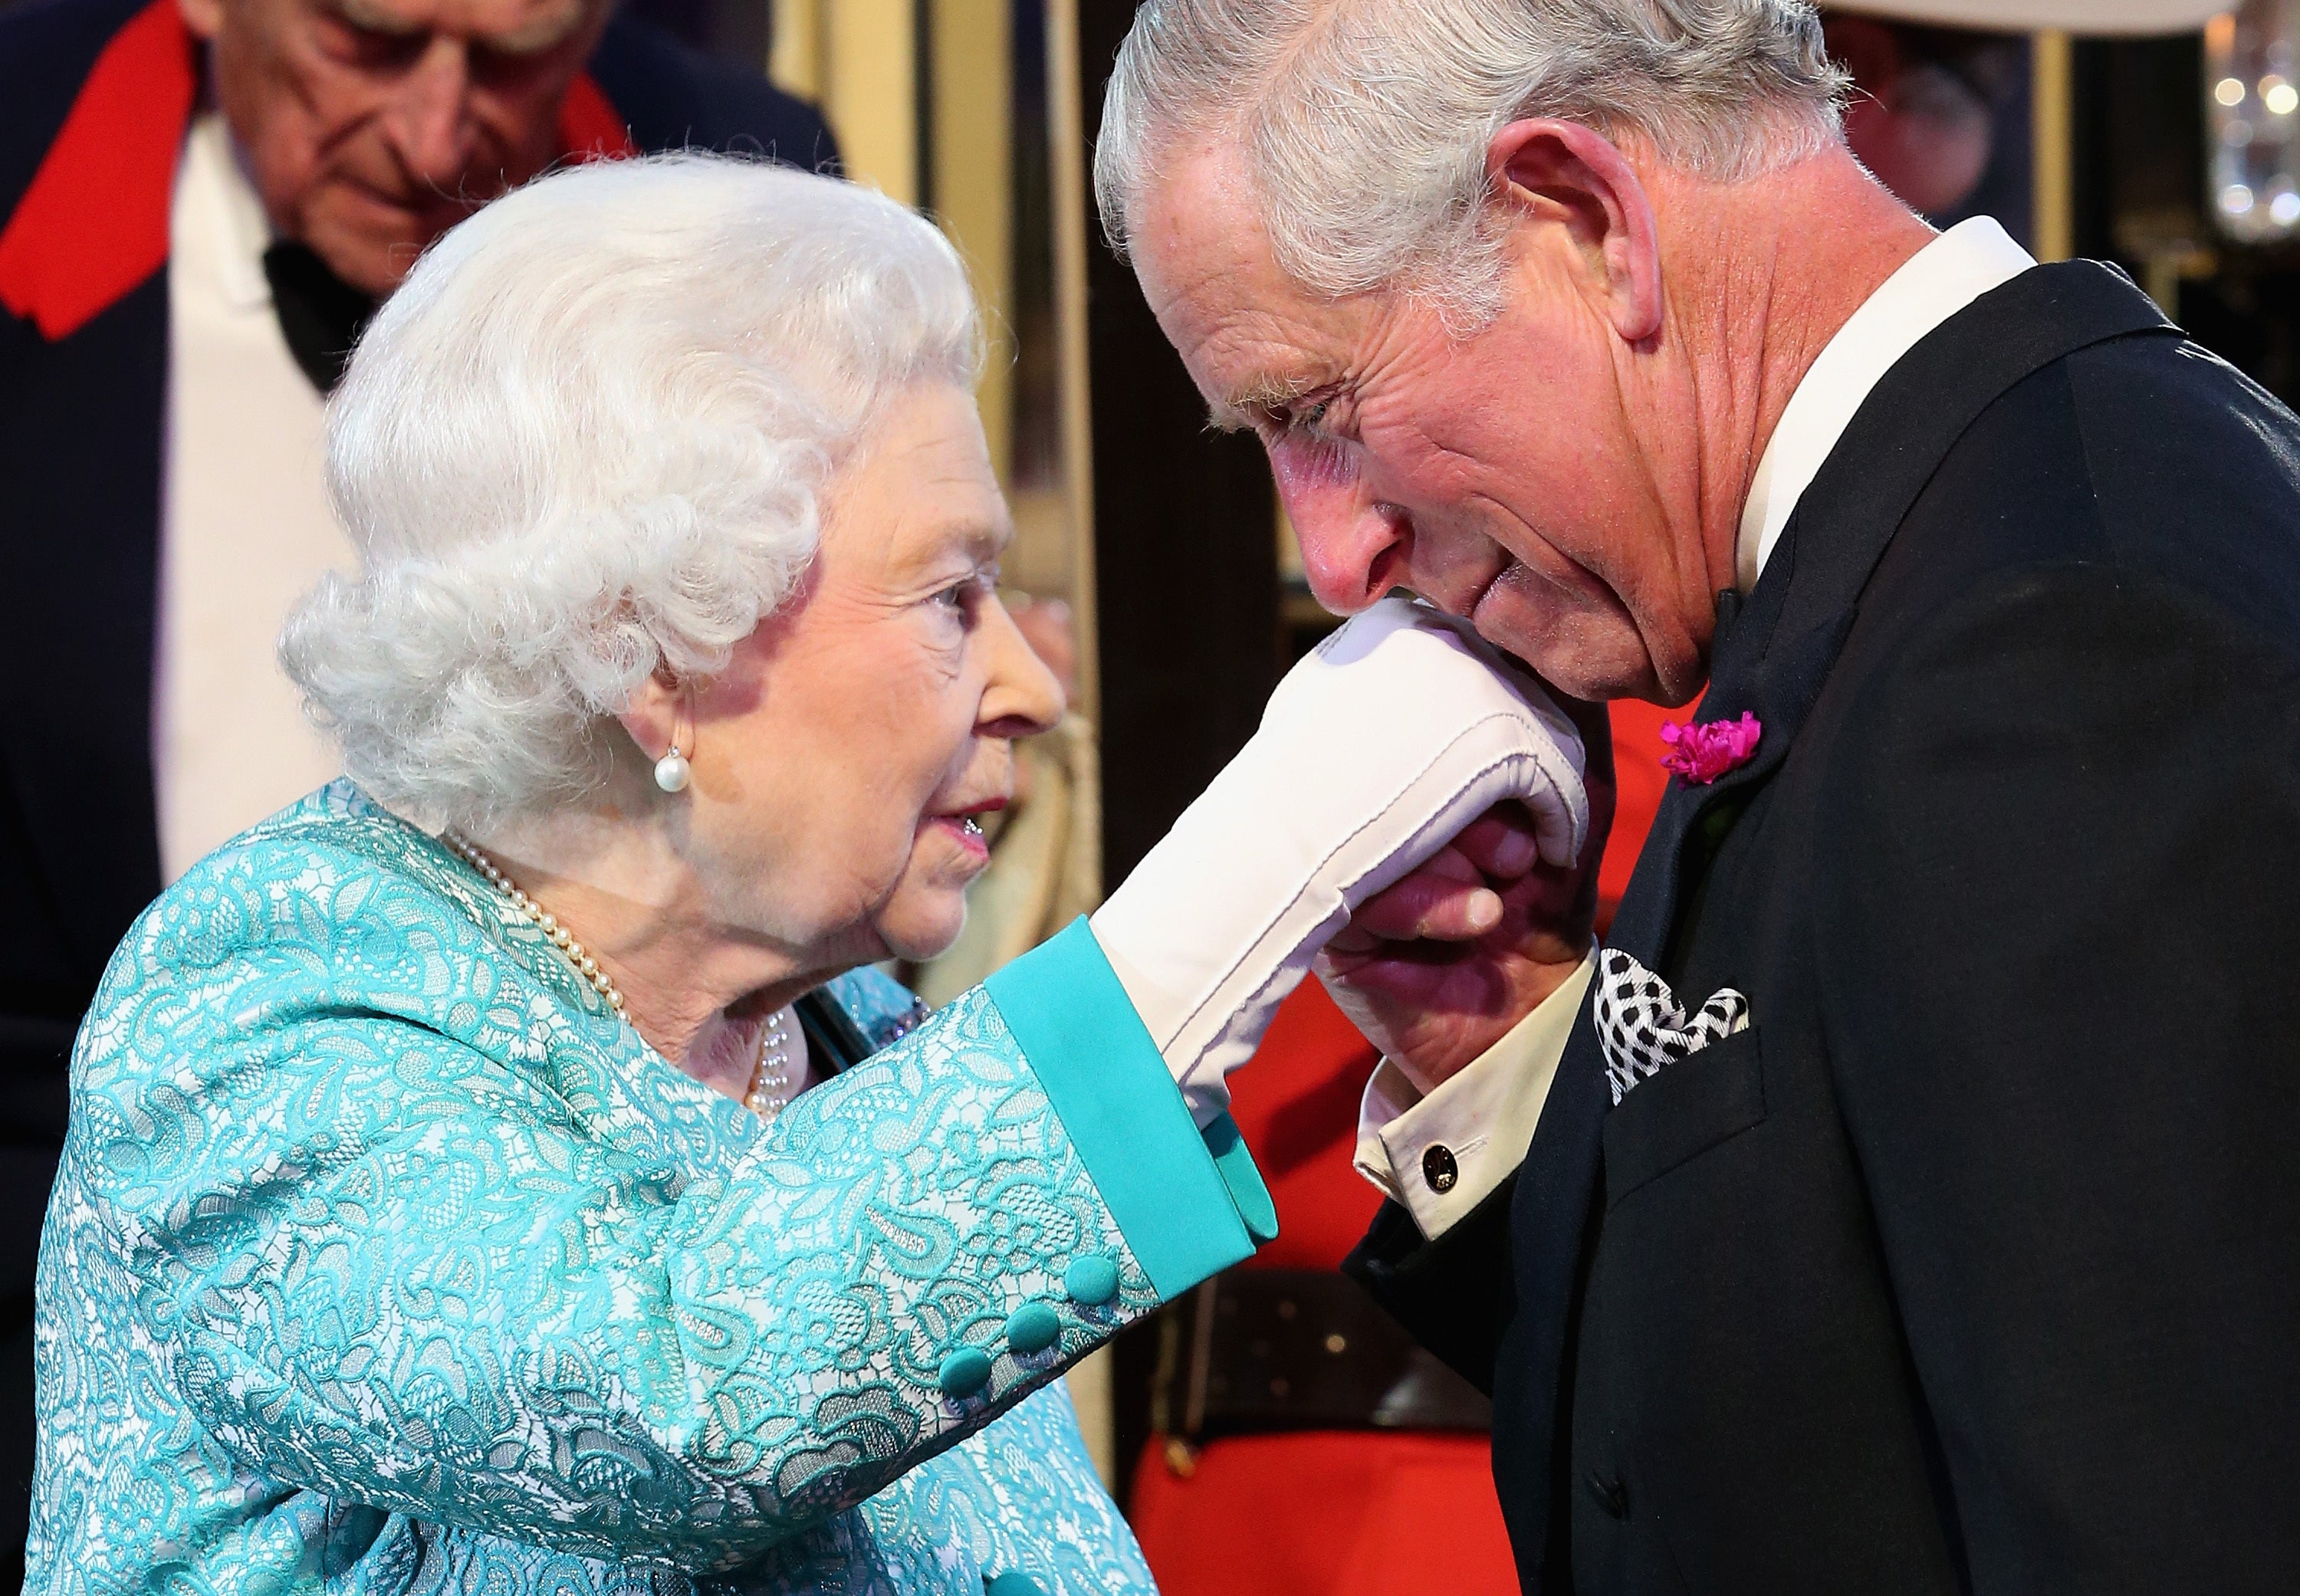 The Queen being greeted by the Prince of Wales in 2016 (Chris Jackson/PA)